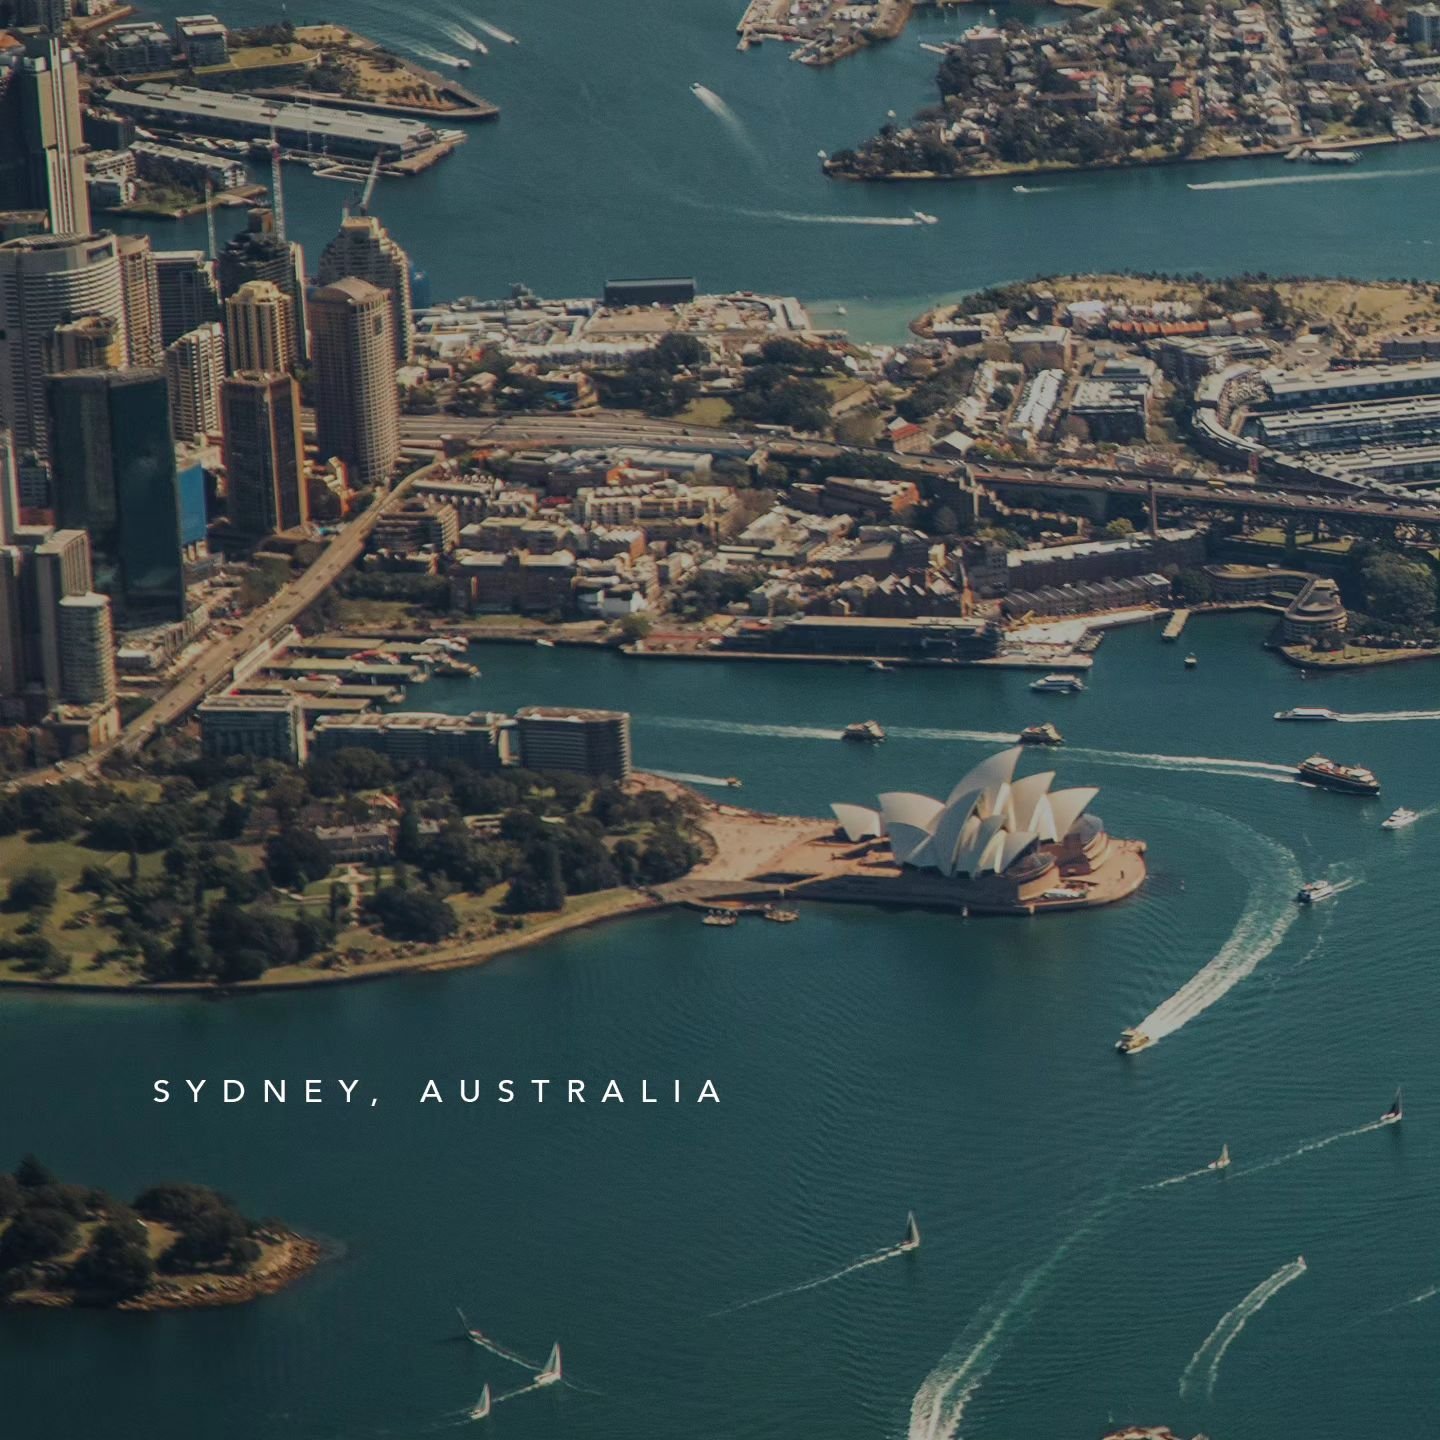 Embark on a journey to the vibrant city of Sydney, Australia, with our bespoke concierge service. From iconic landmarks like the Sydney Opera House to hidden gems waiting to be discovered, let us join you in an unforgettable adventure.

reservations@